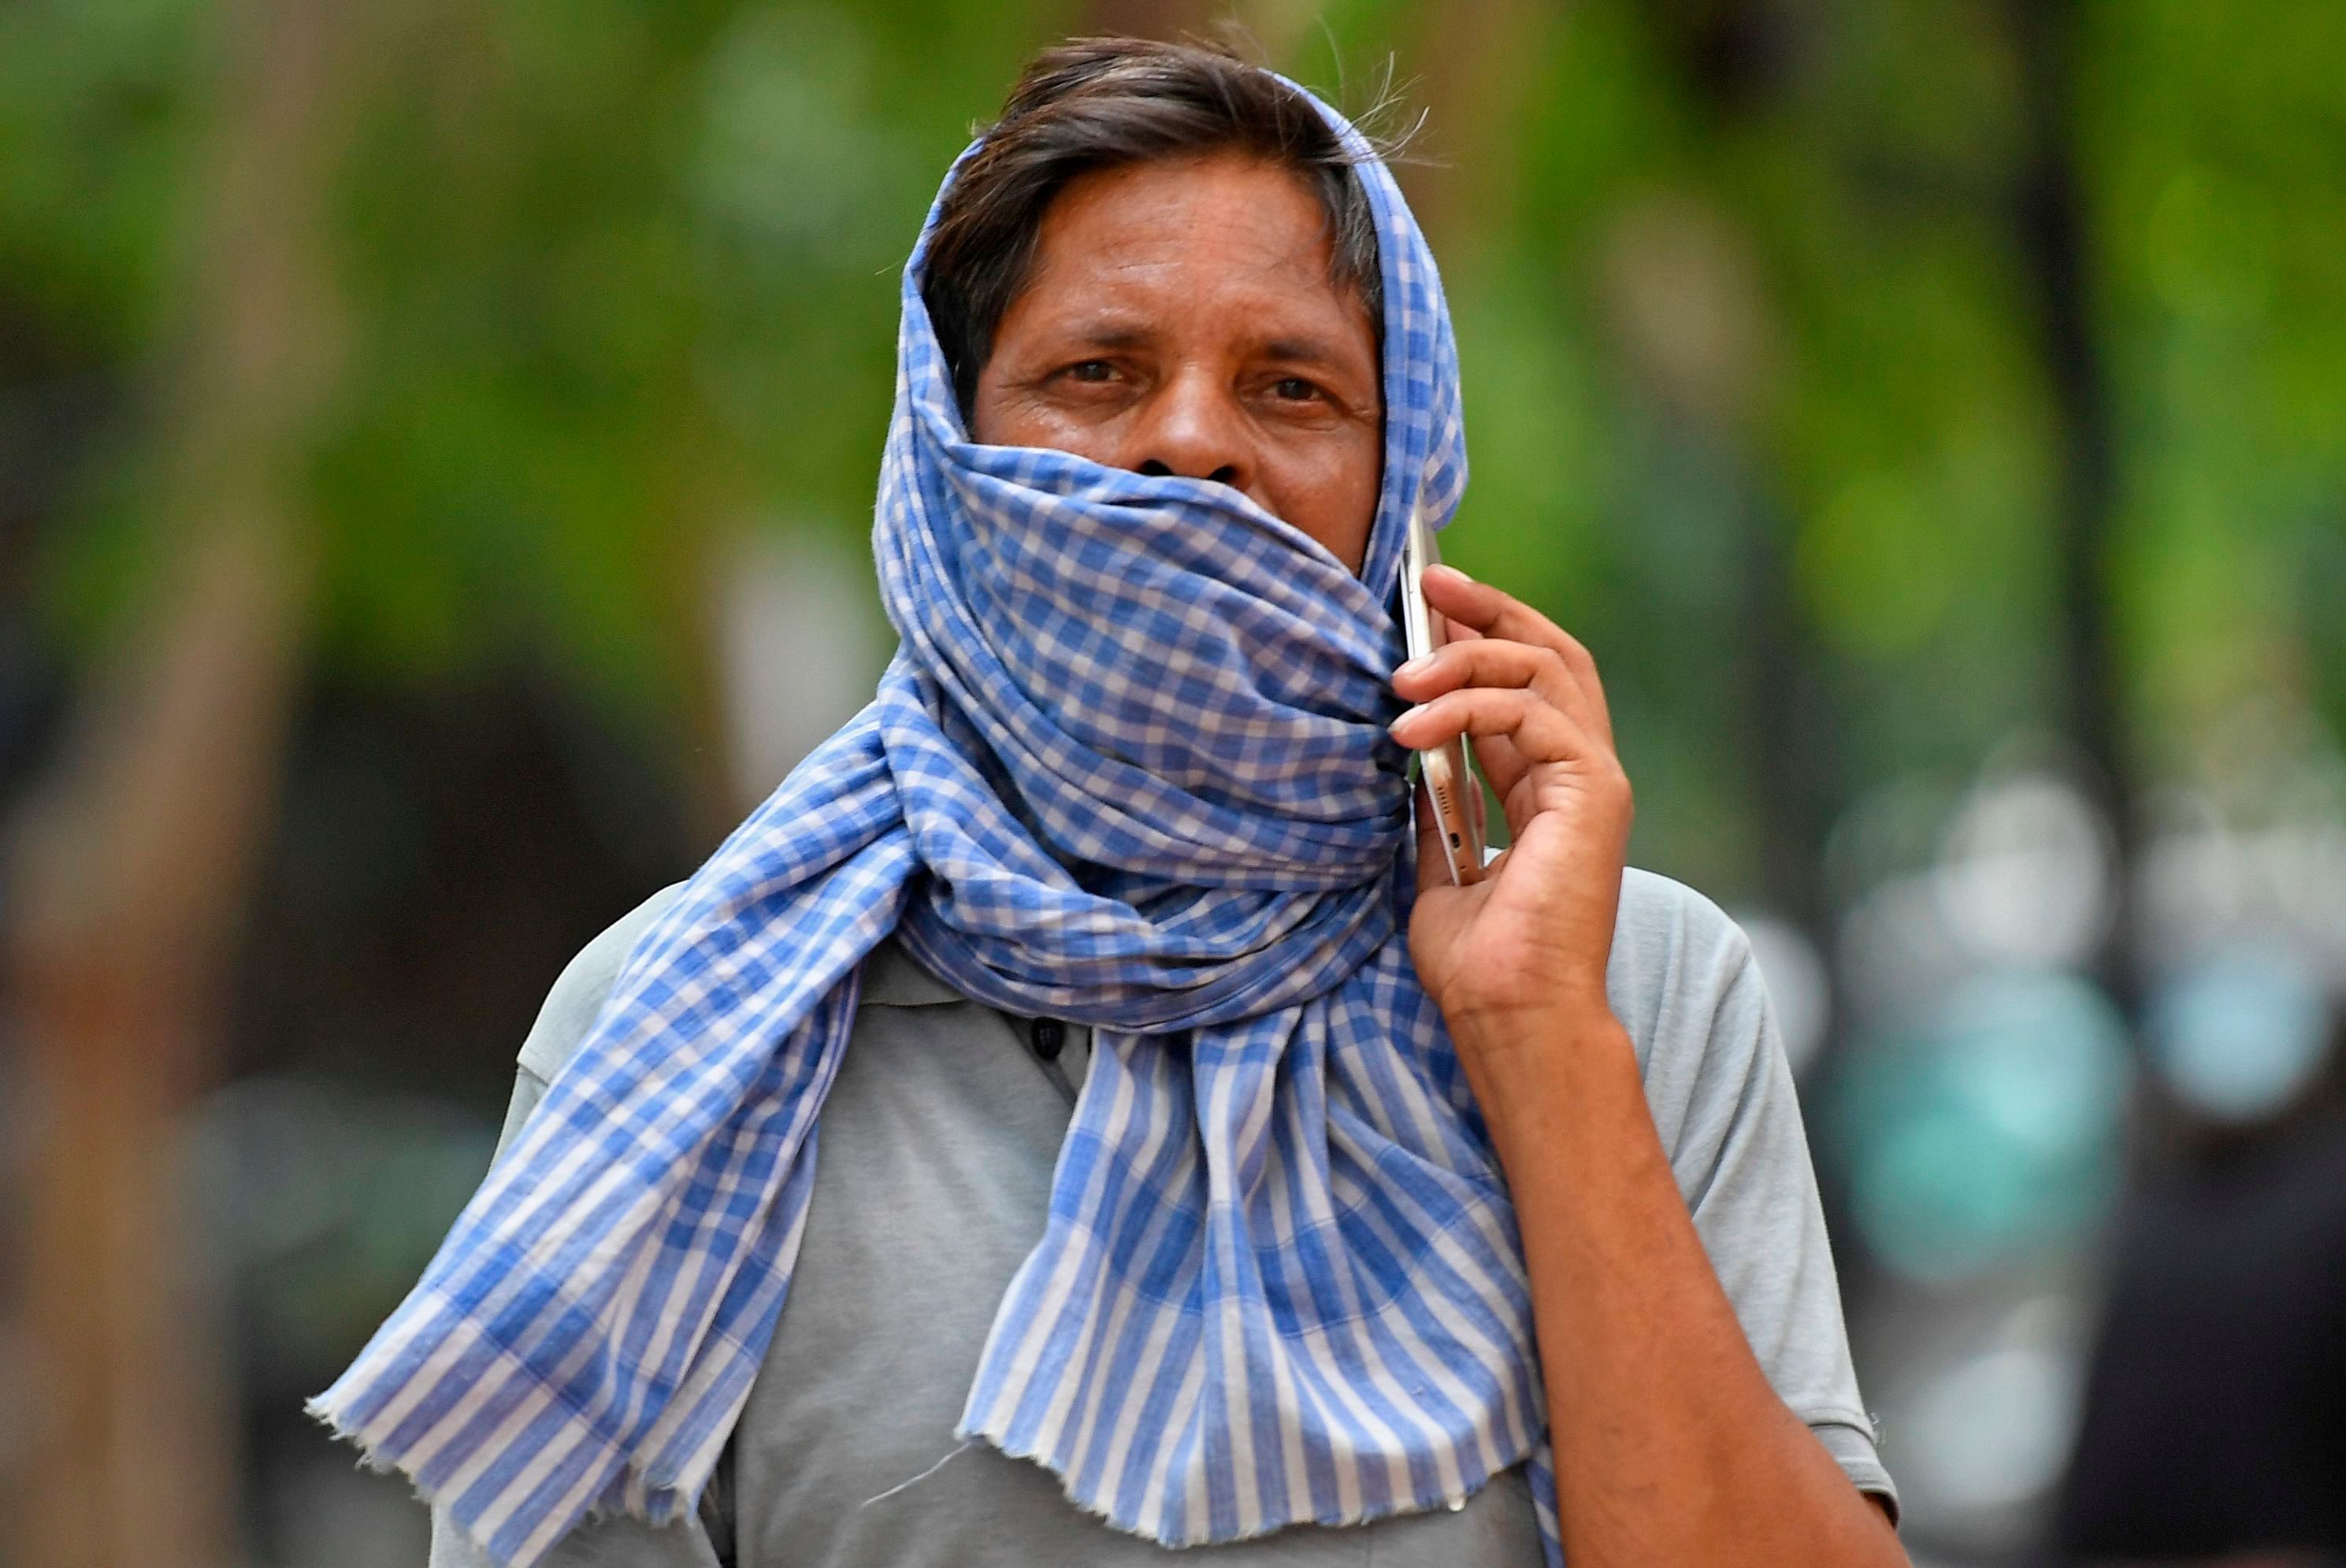 In this picture taken on July 10, 2020, a man speaks on a mobile phone while wearing a scarf over his mouth as a facemask during the novel coronavirus pandemic, in New Delhi. Credit: AFP Photo